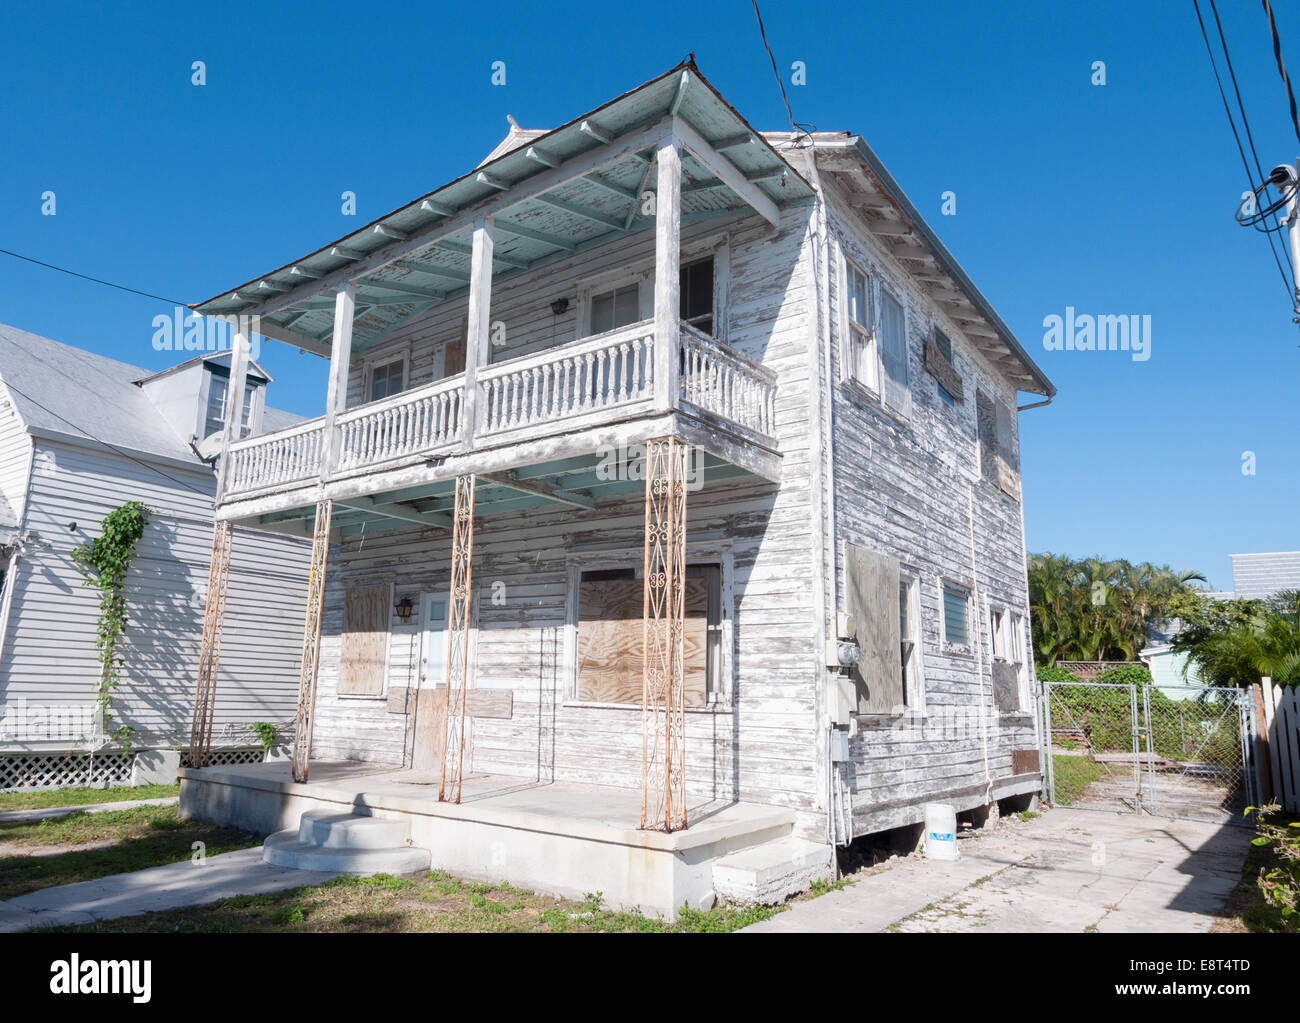 Wooden house in Key West, Florida, USA Stock Photo